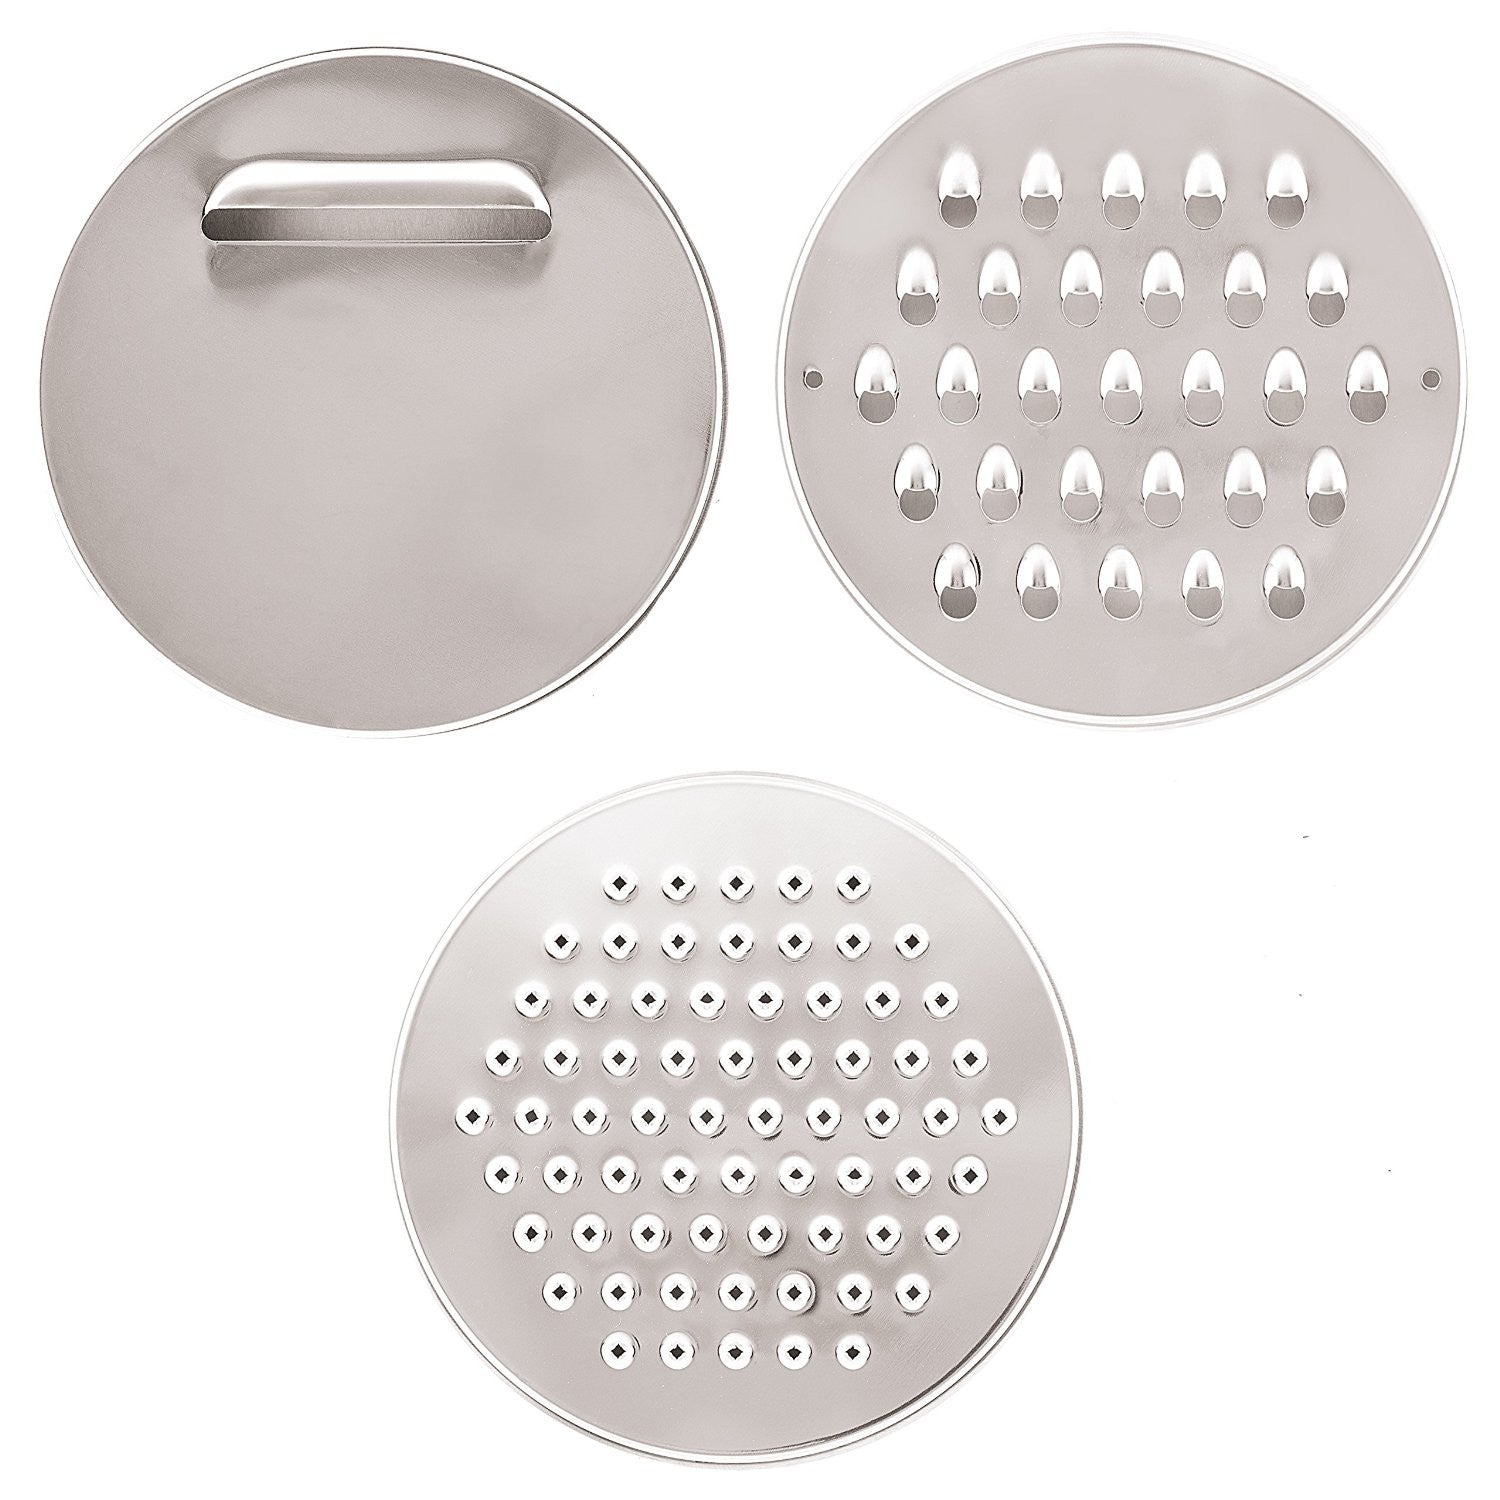 Stainless Steel Non-Slip Mixing Bowls Set with Lids and Graters, Set of 5, Blue